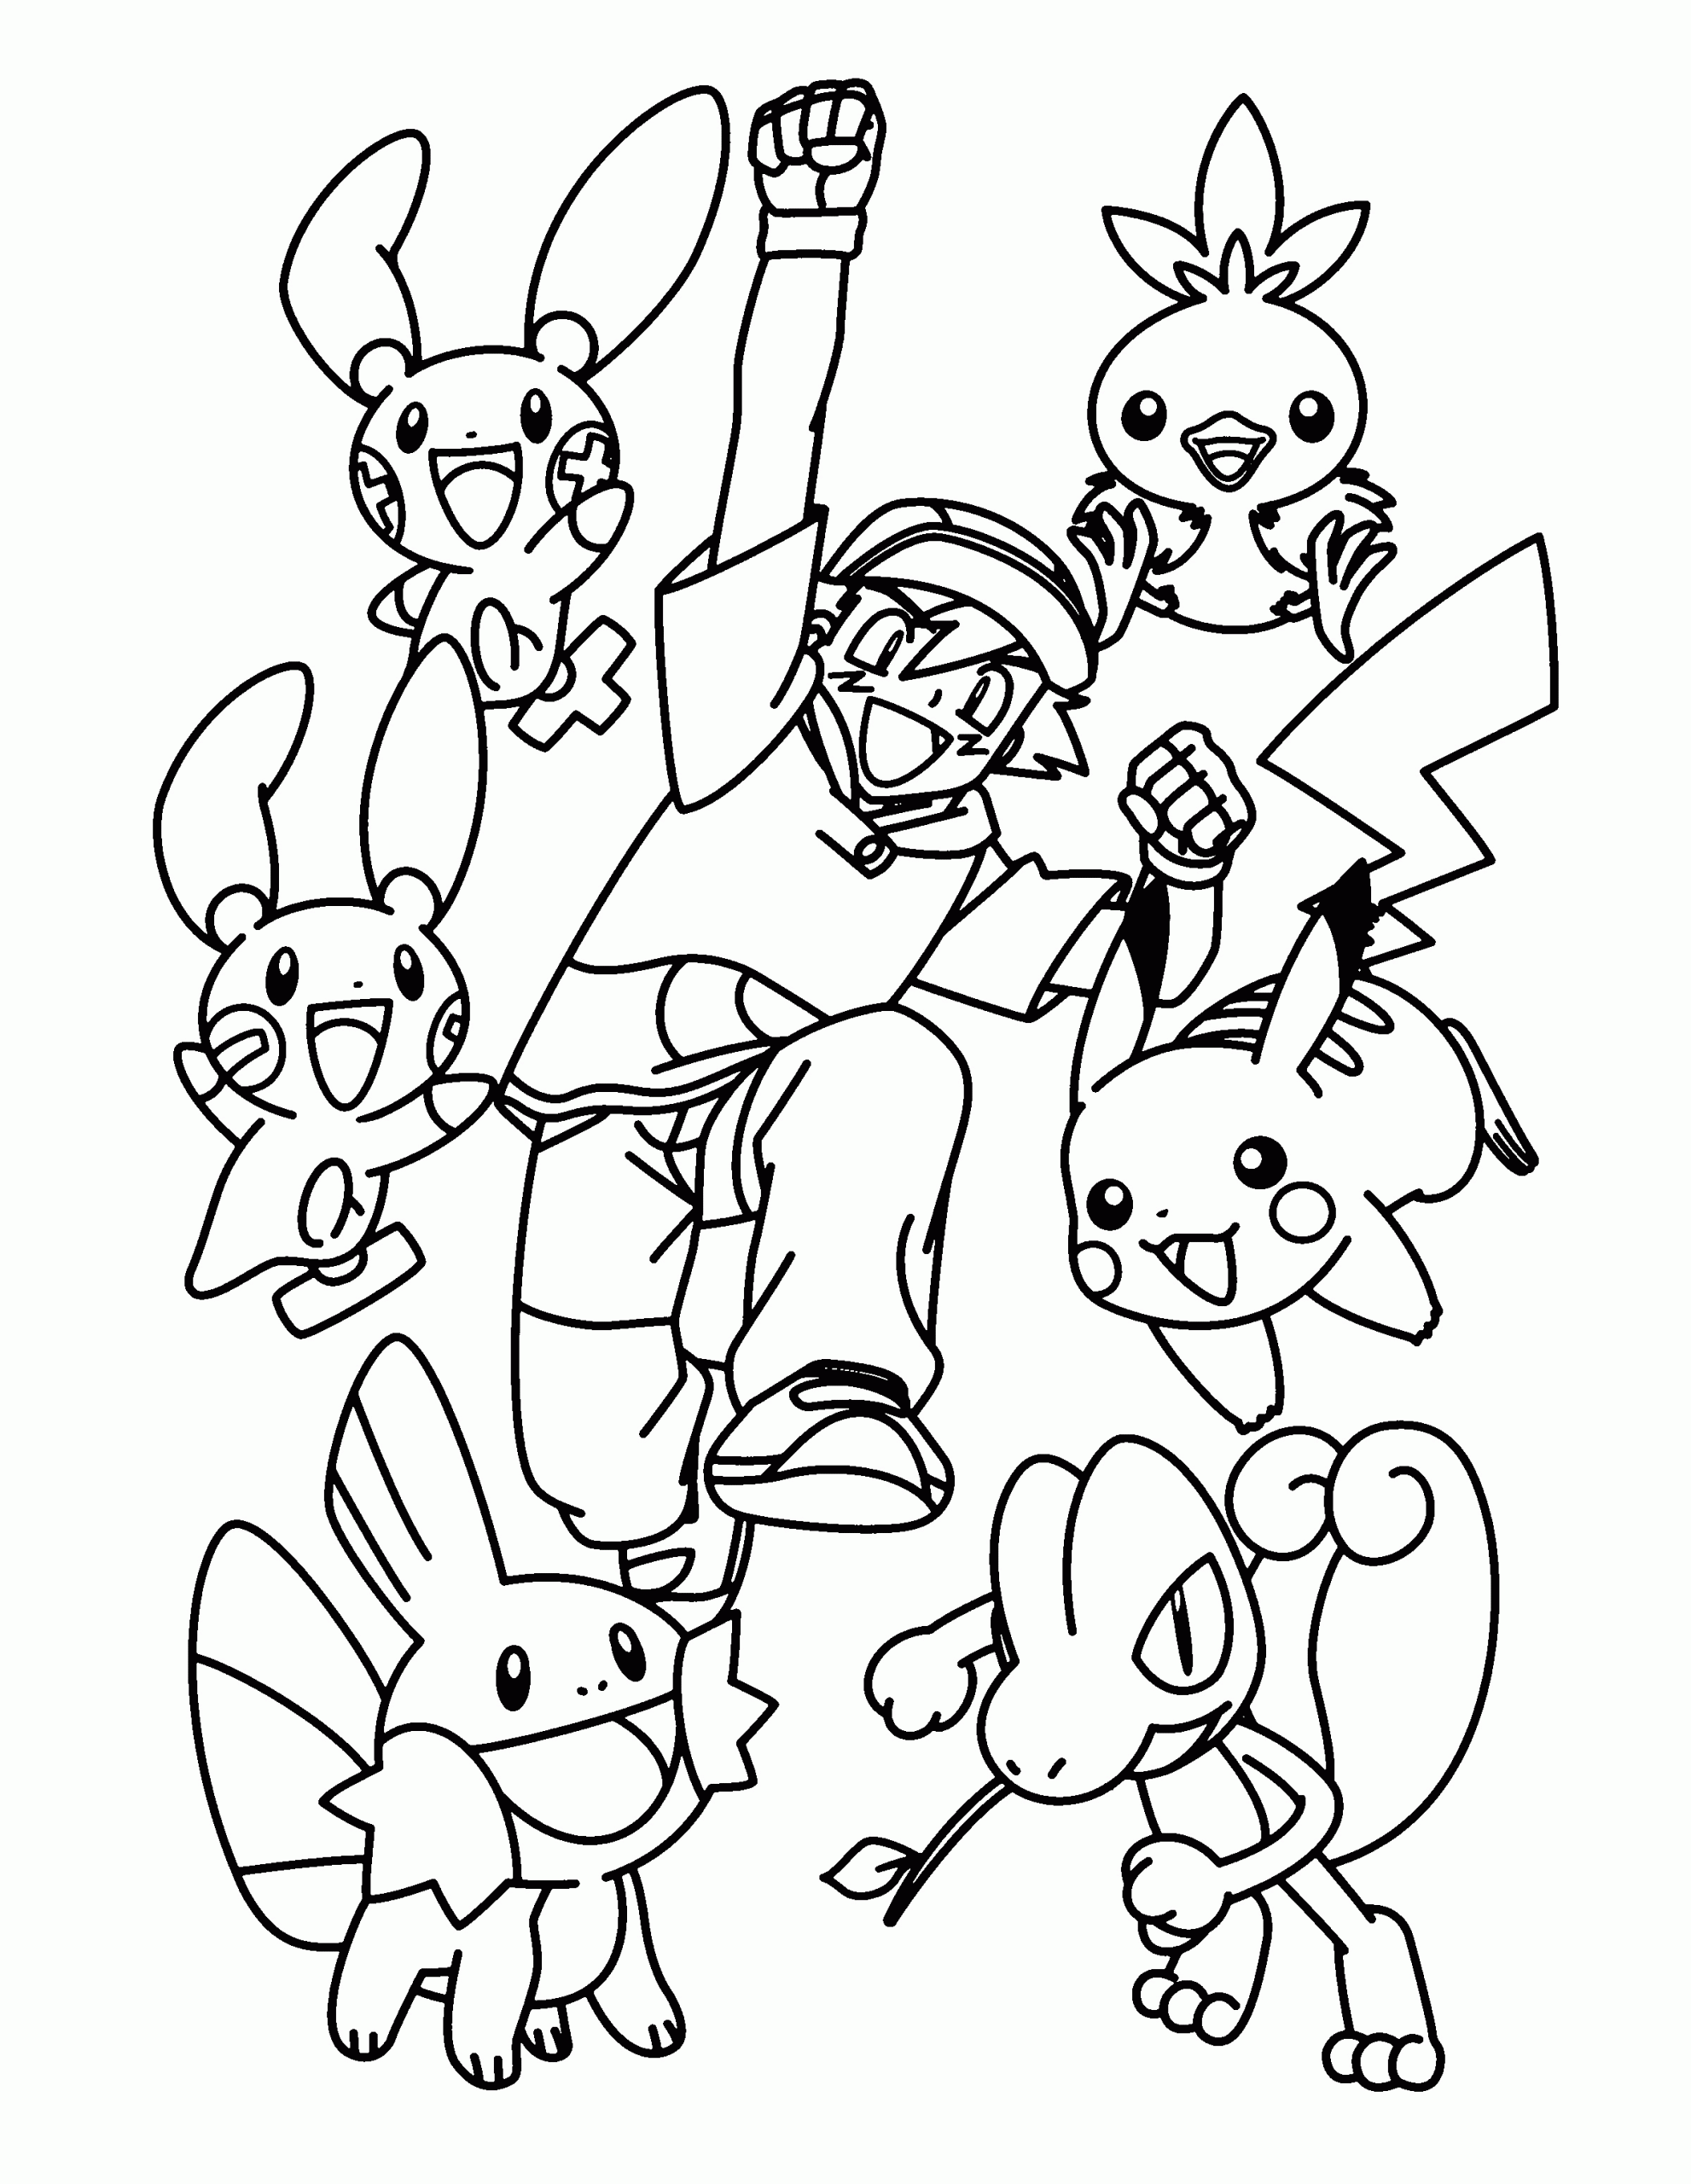 Printable Pokemon Coloring Pages
 Coloring Page Pokemon advanced coloring pages 1